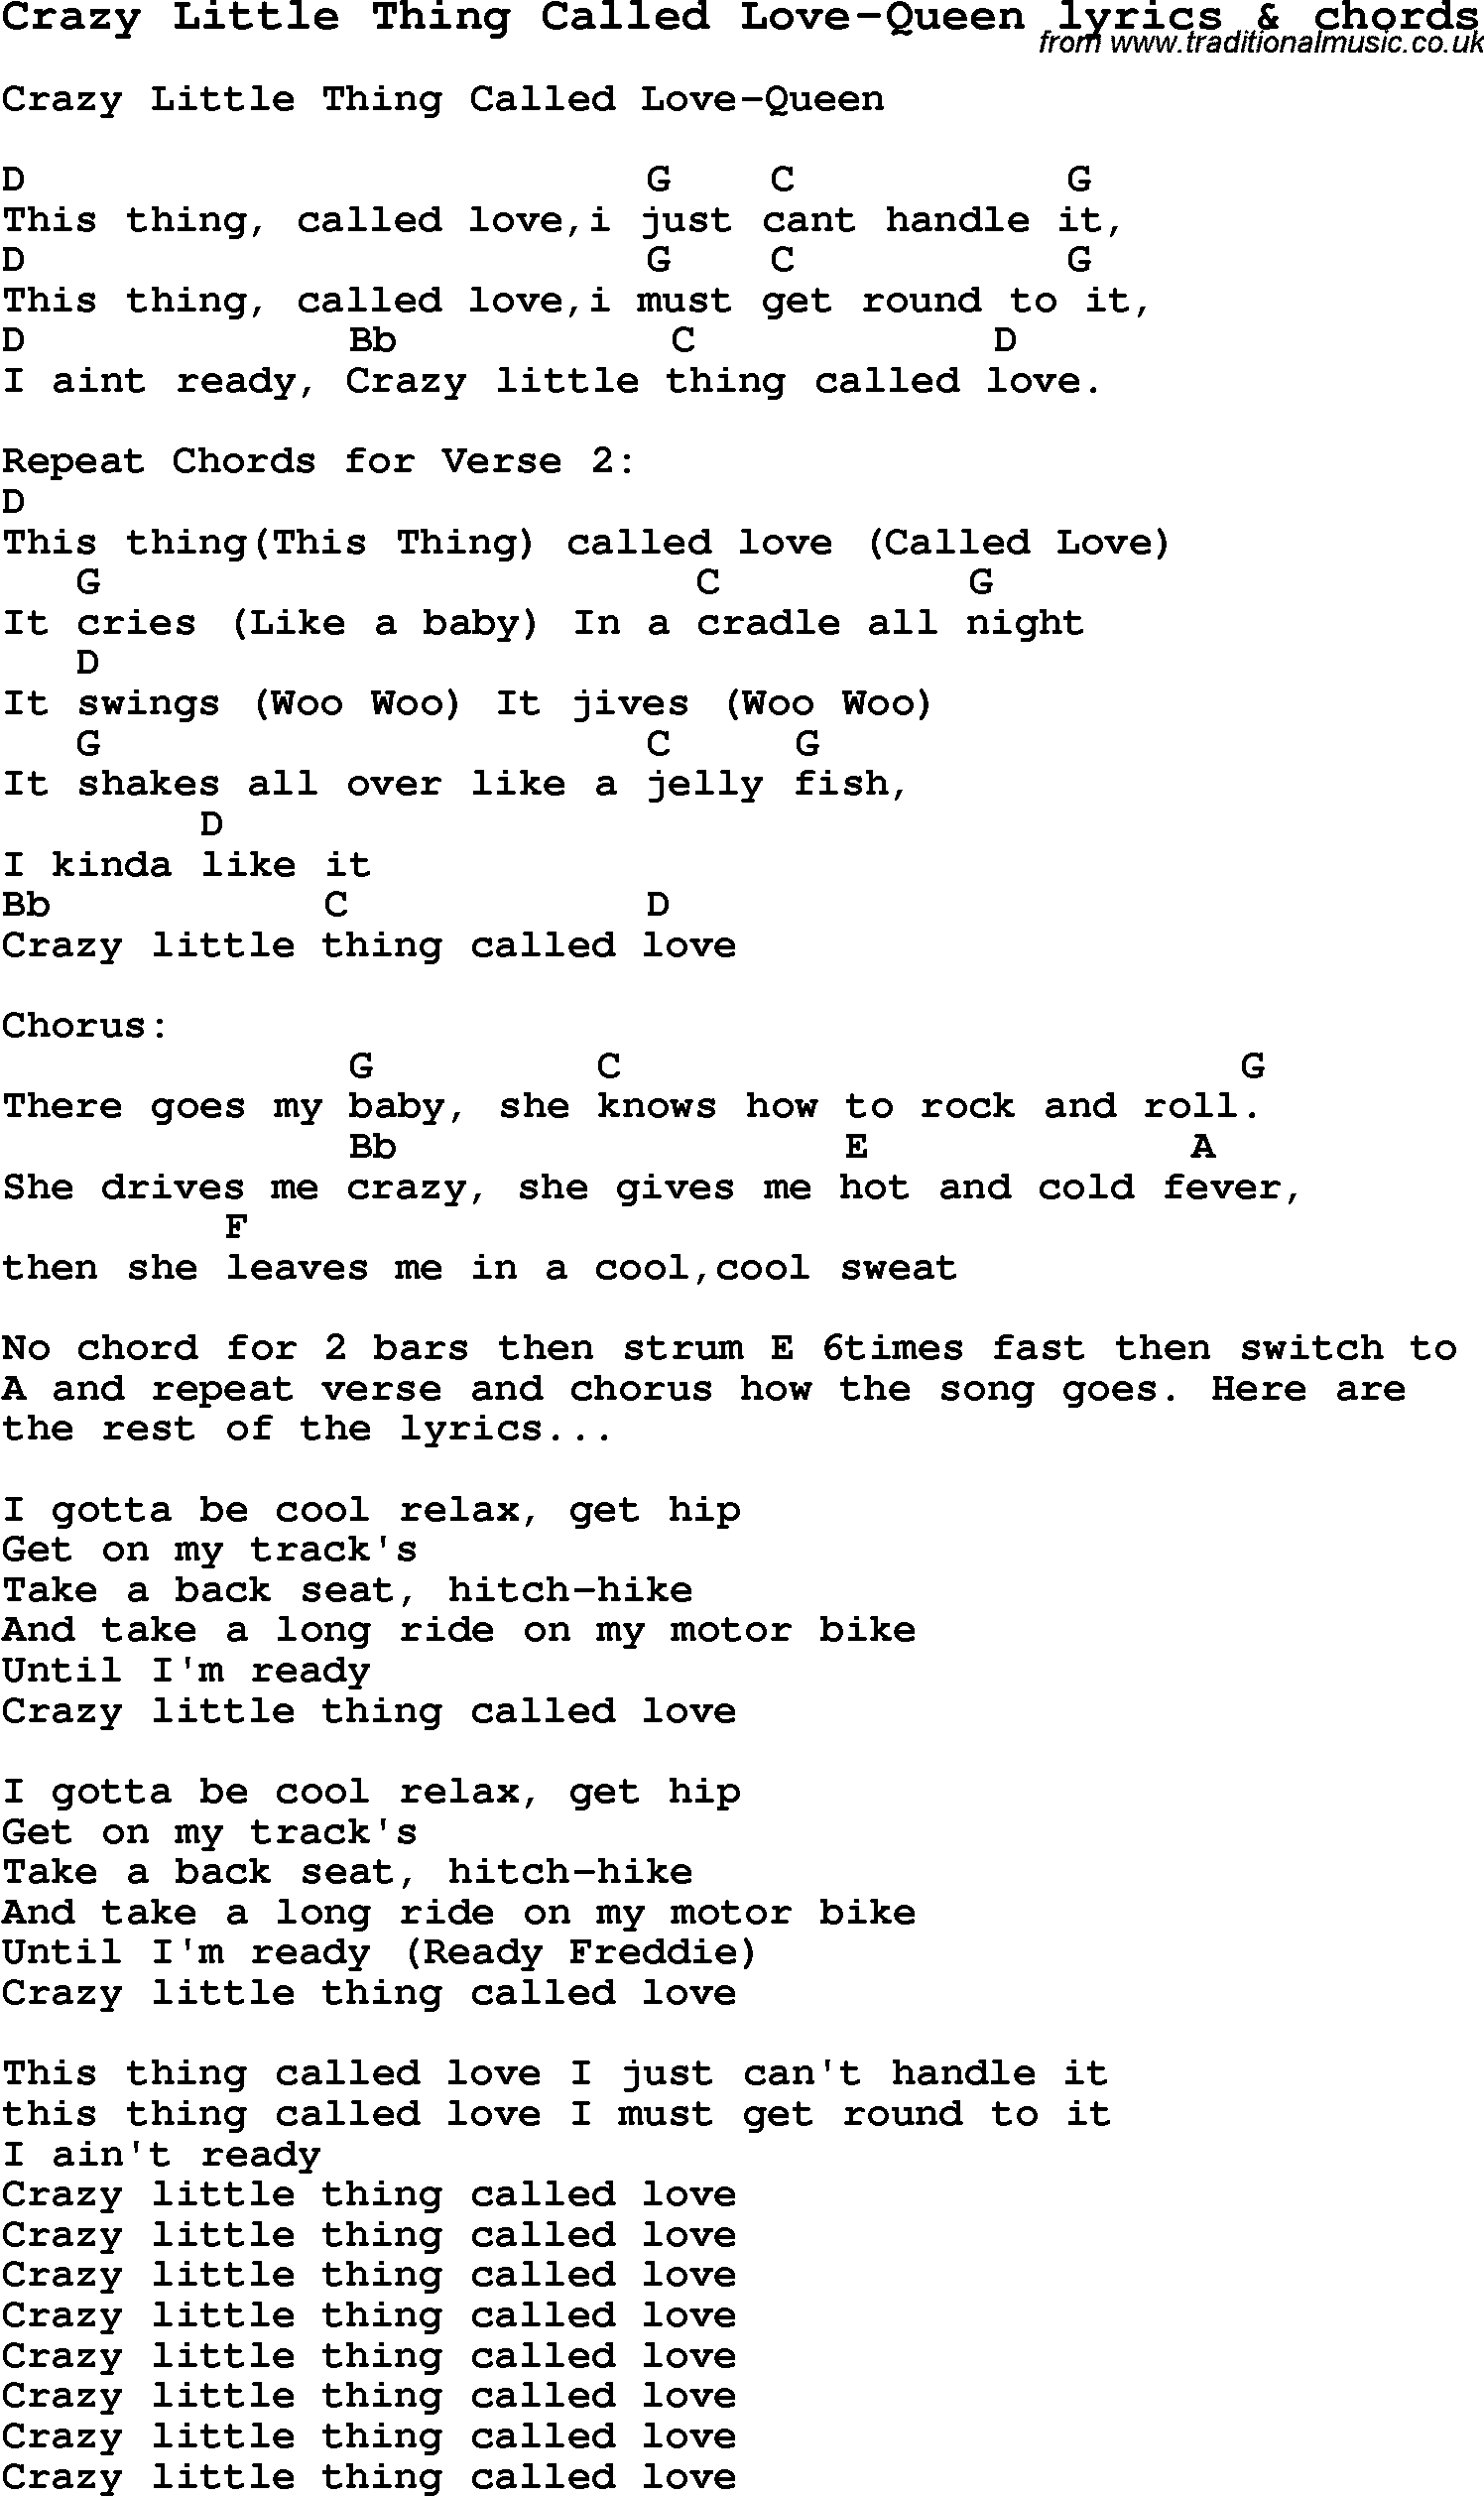 Love Song Lyrics for: Crazy Little Thing Called Love-Queen with chords for Ukulele, Guitar Banjo etc.